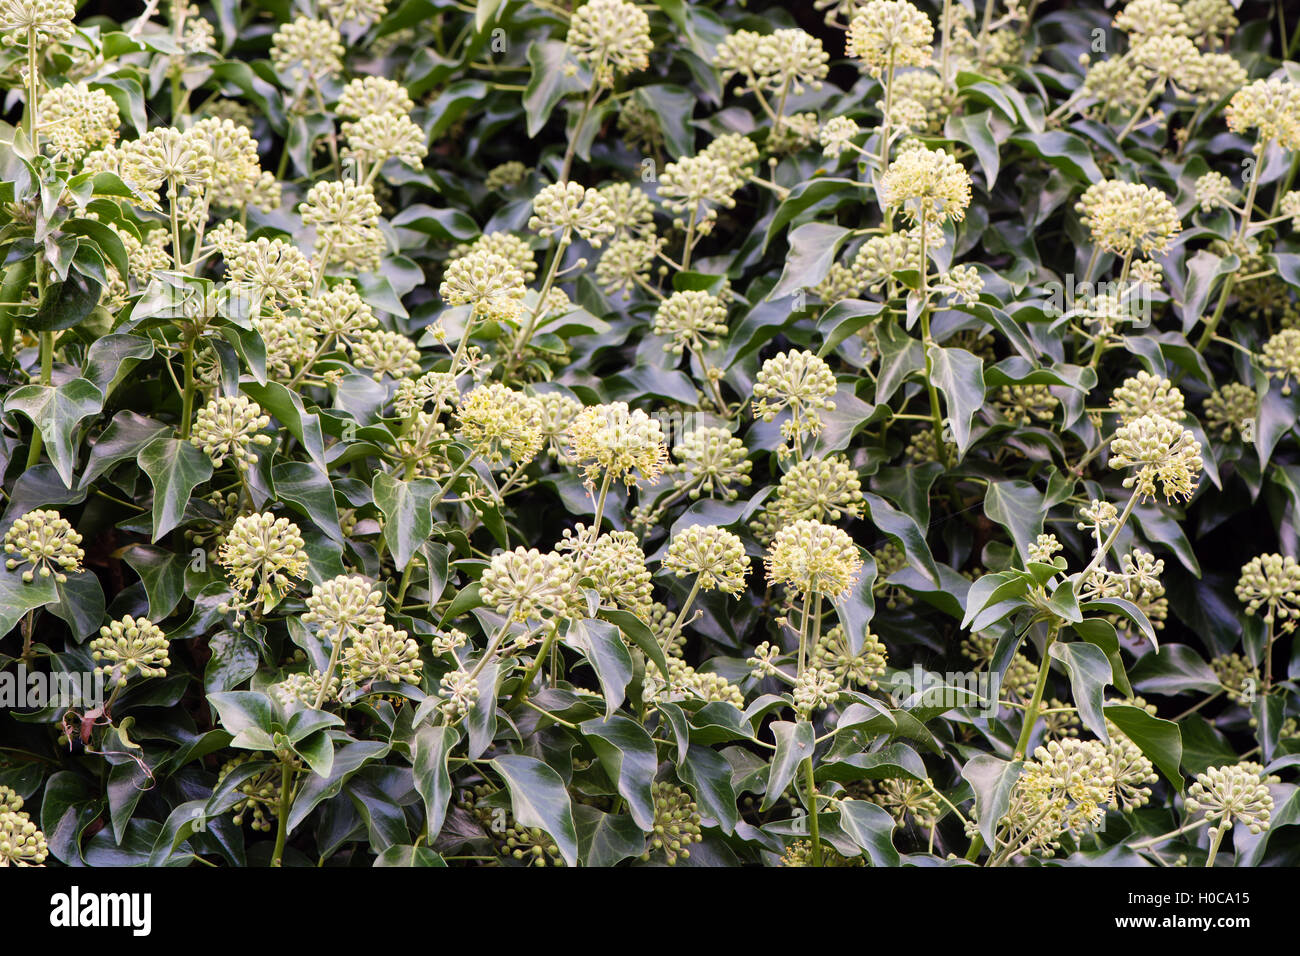 Ivy (Hedera helix) flowers in hedge. Masses of green and yellow flowers on this familiar evergreen climbing shrub Stock Photo